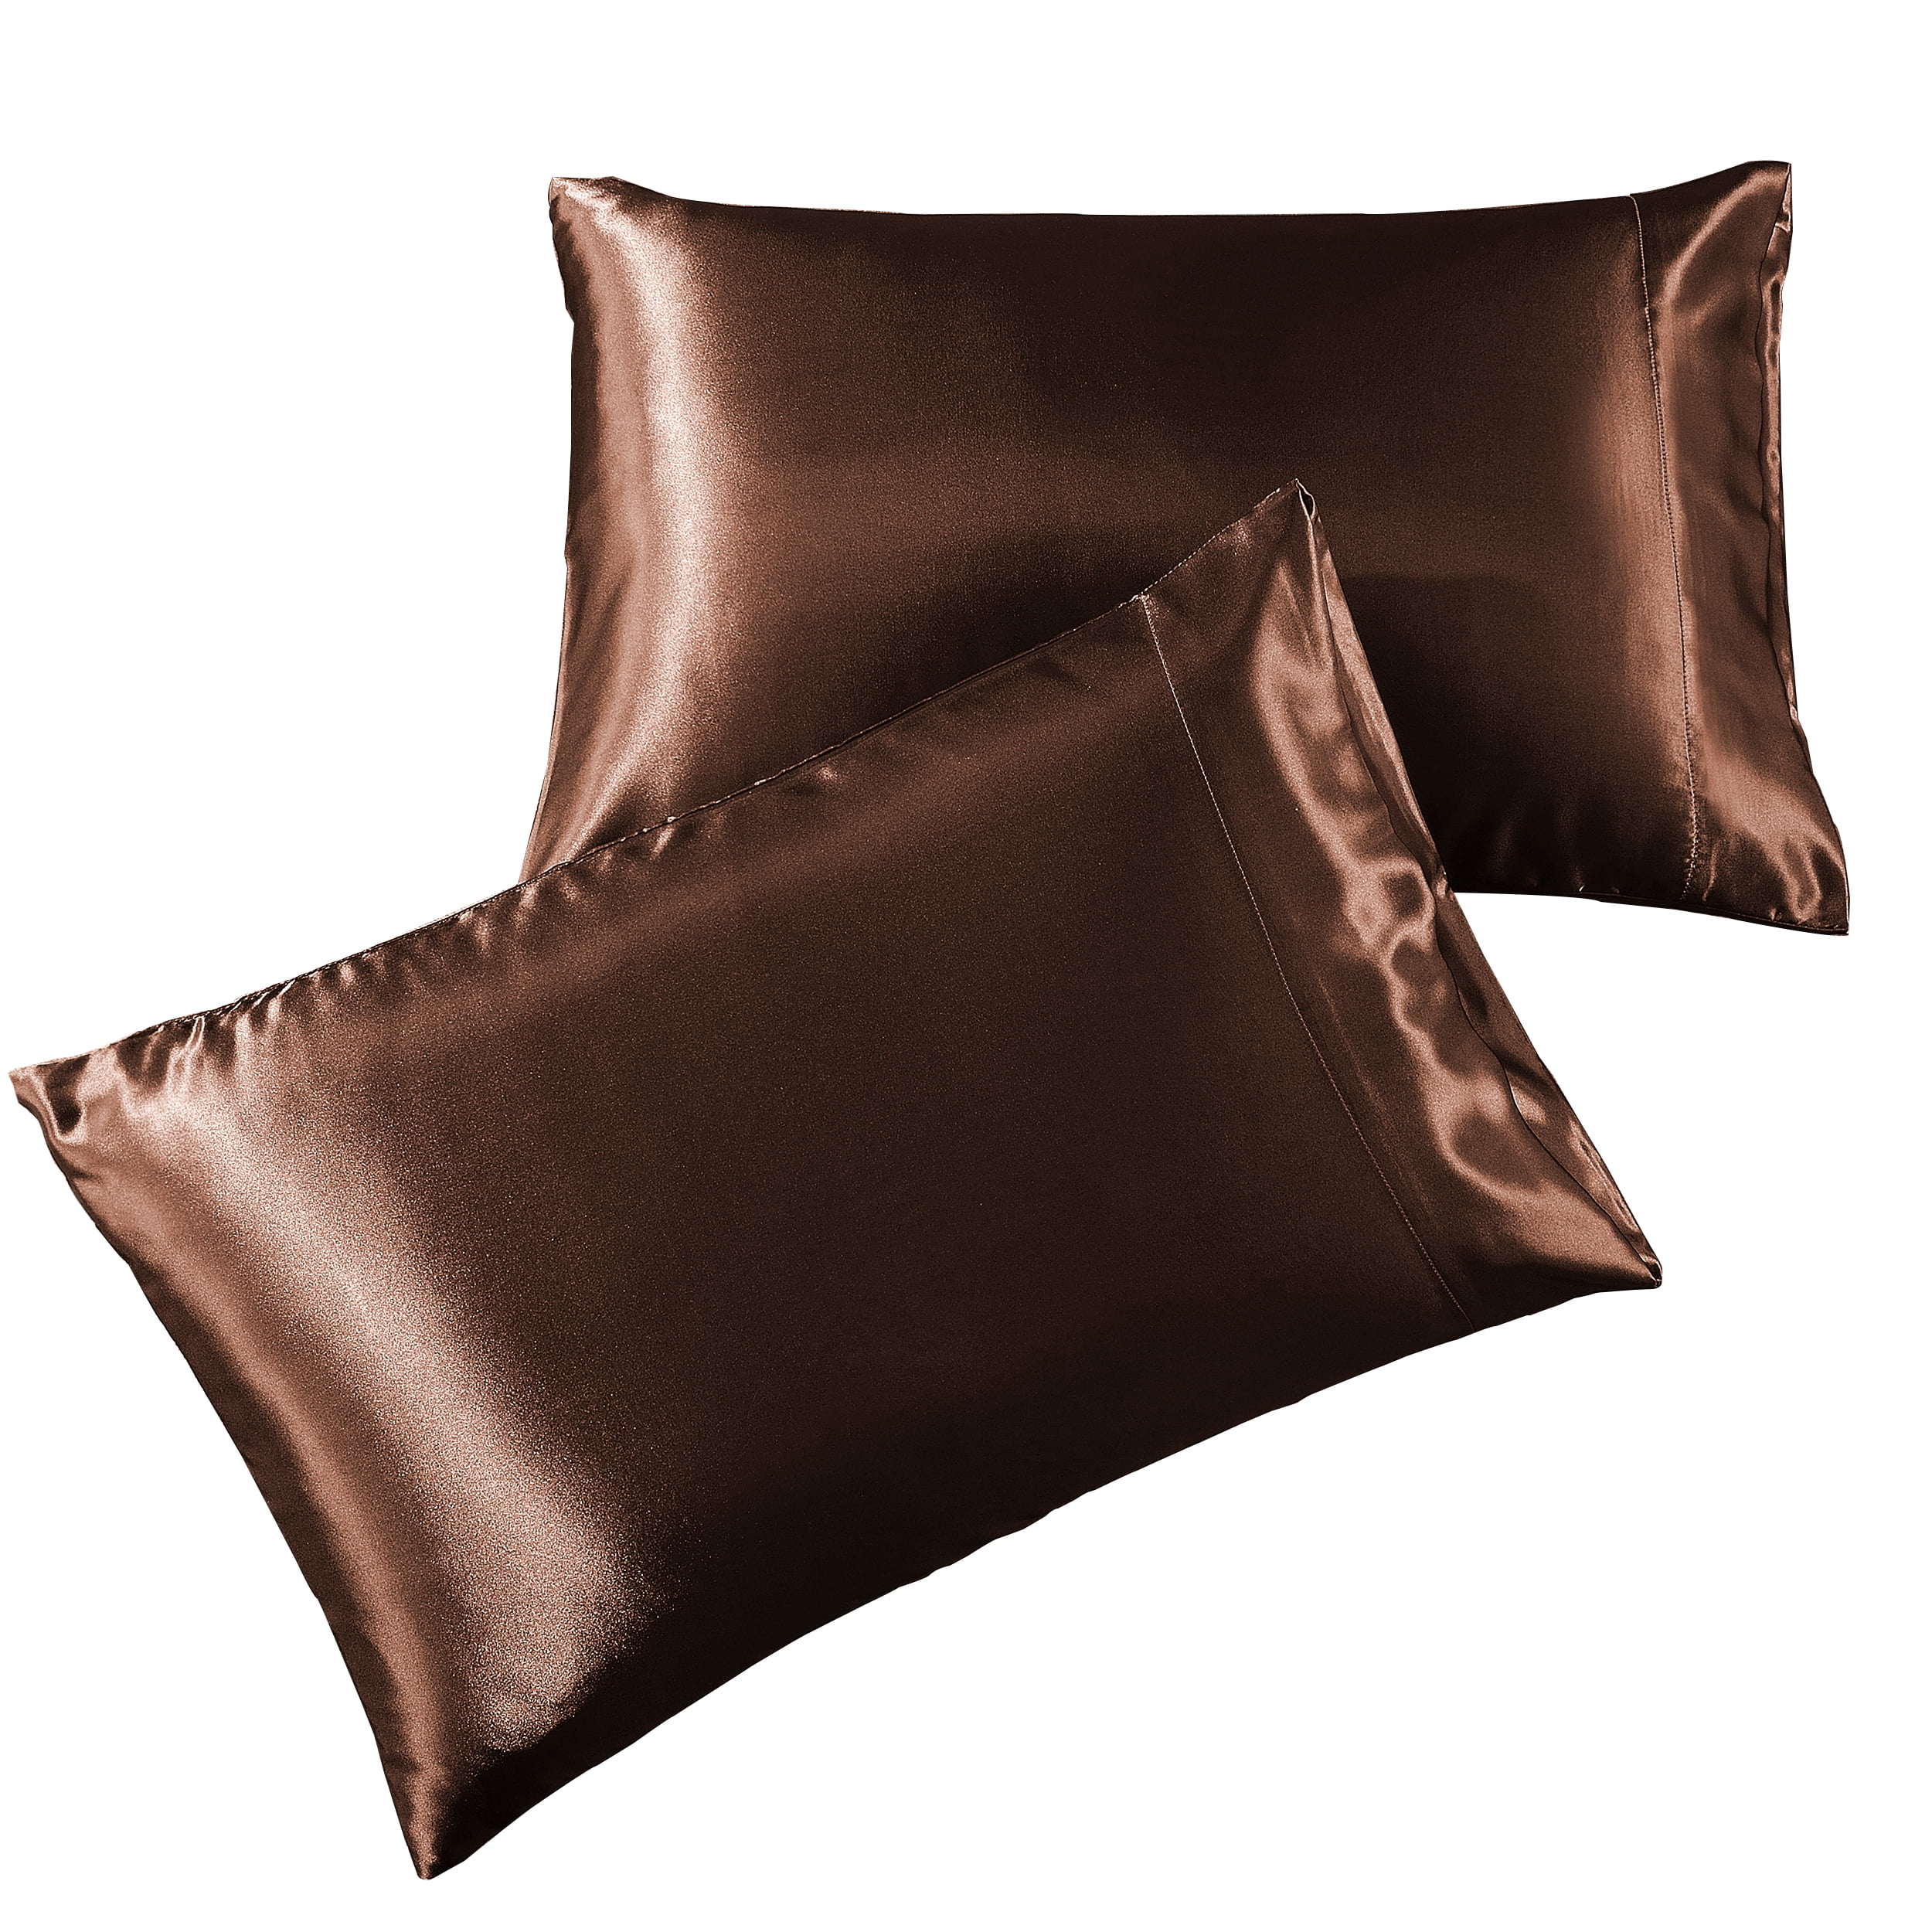 Pure Linen Satin Pillowcase King - Hotel Luxury Silky Pillow Cases for Hair and Skin 2-Pack, Brown Extra Soft 1800 Double Brushed Microfiber Pillow Covers